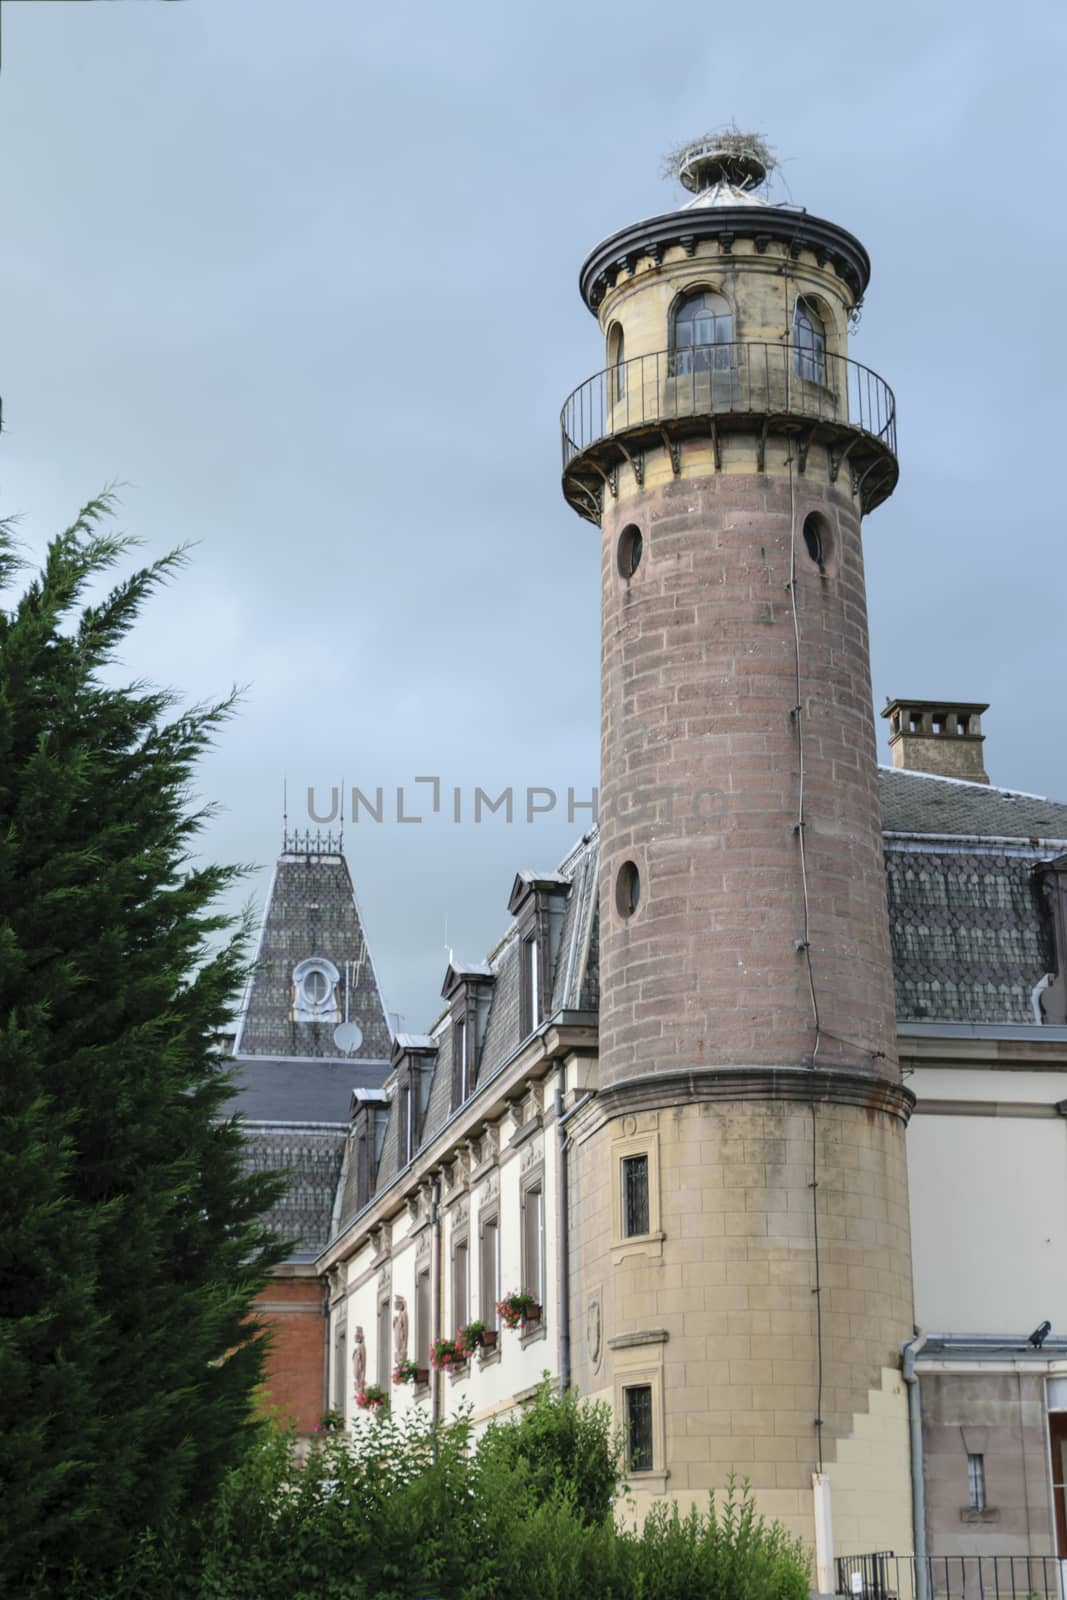 France, Alsace, June 2015: Stork nest on top of a chateau tower in Alsace France 